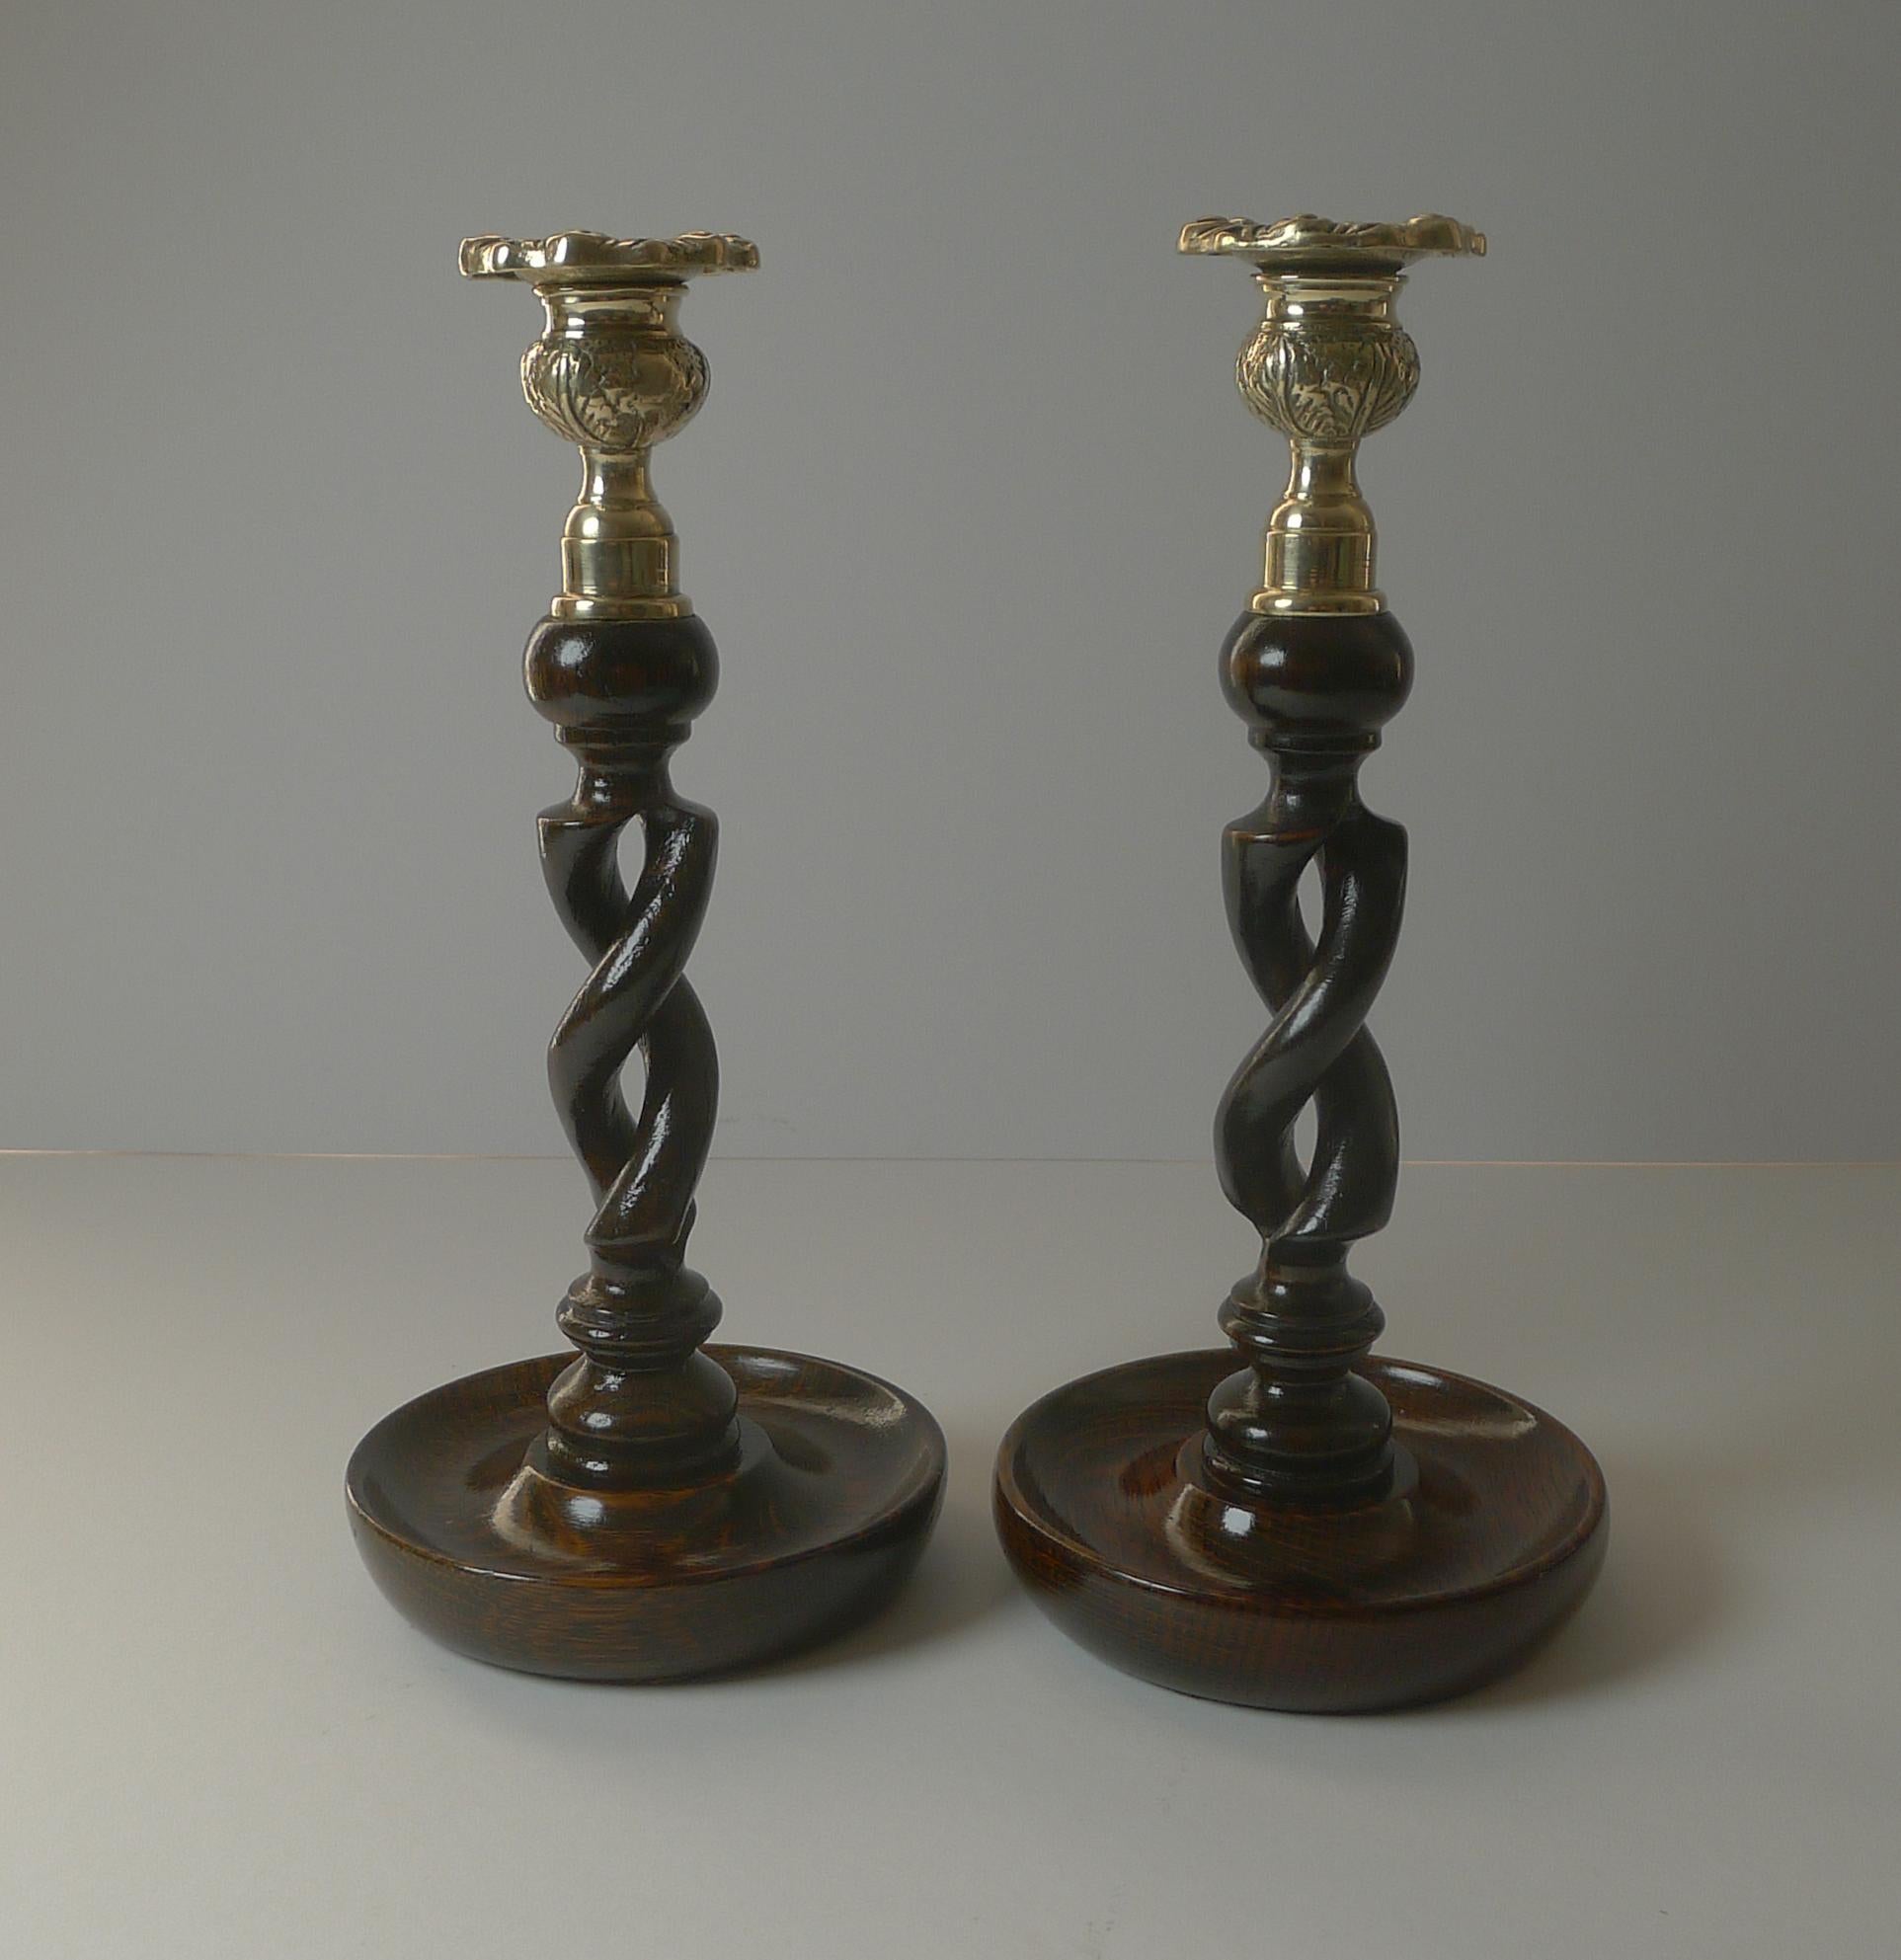 A wonderful pair of wooden candlesticks, always a winning combination, polished Oak and brass.

Not to be confused with a simple pair of twists, these are the highly sought-after 